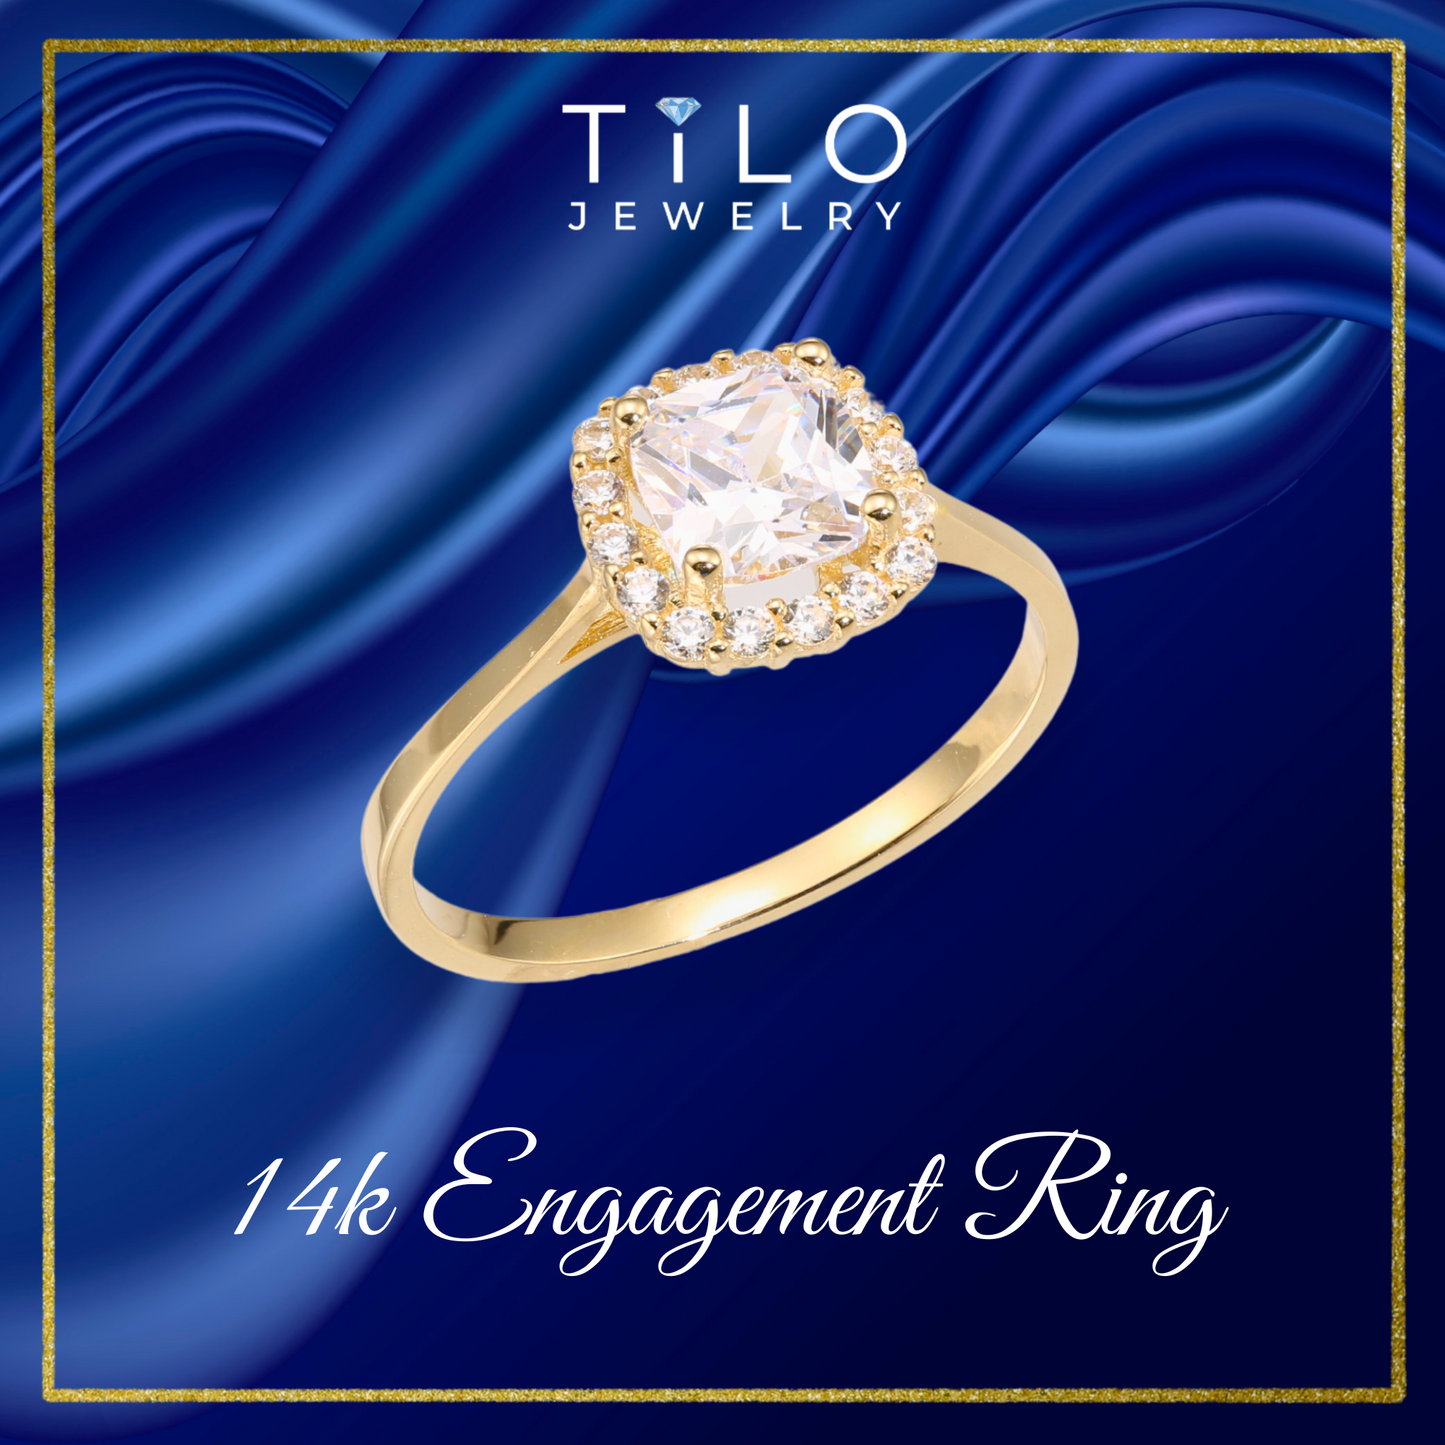 14K Yellow Gold Cushion-Cut Halo Engagement Ring, By TILO Jewelry